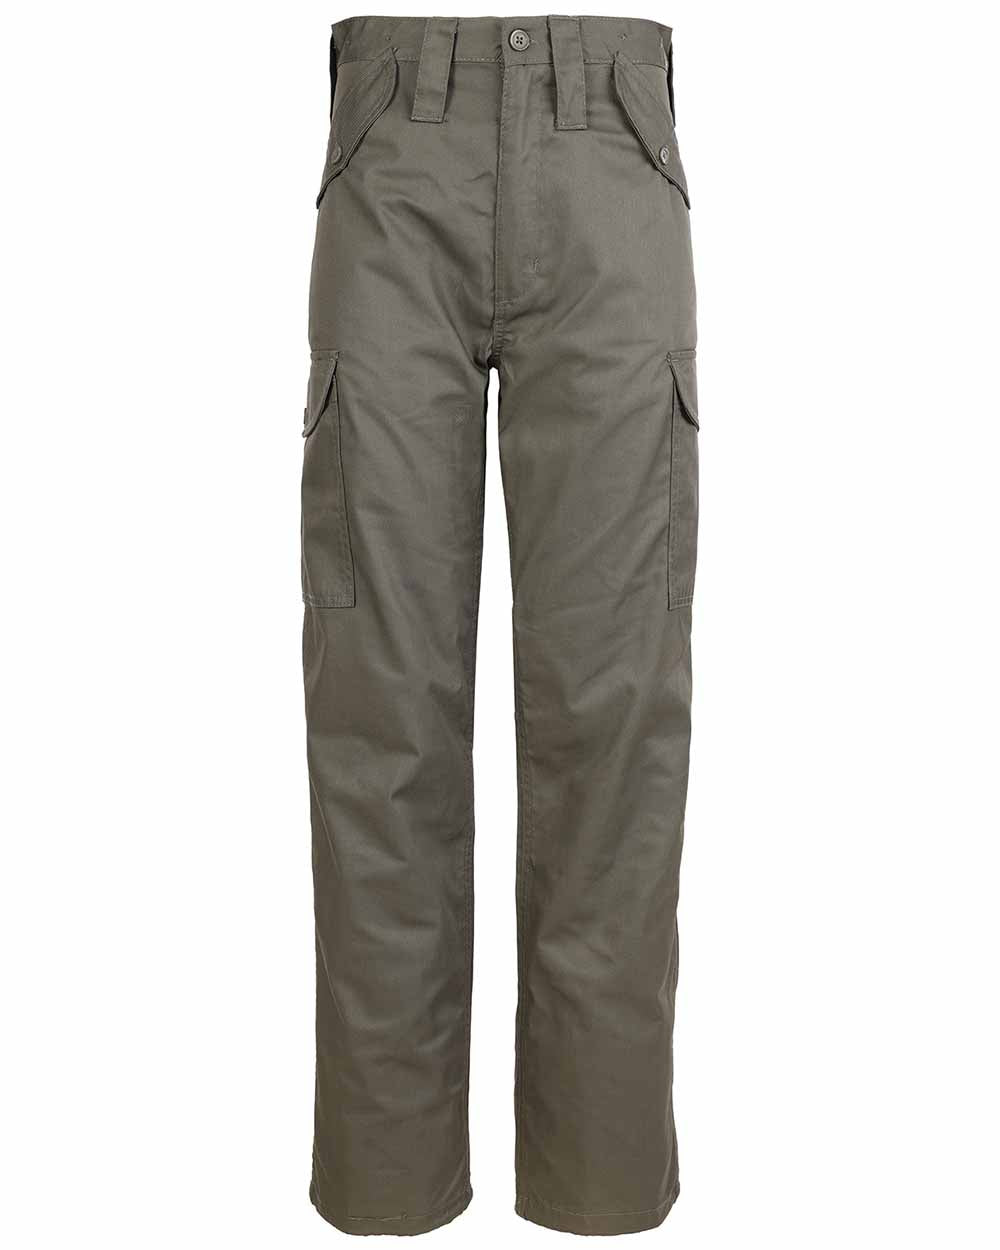 Olive Coloured Fort Combat Trousers On A White Background 